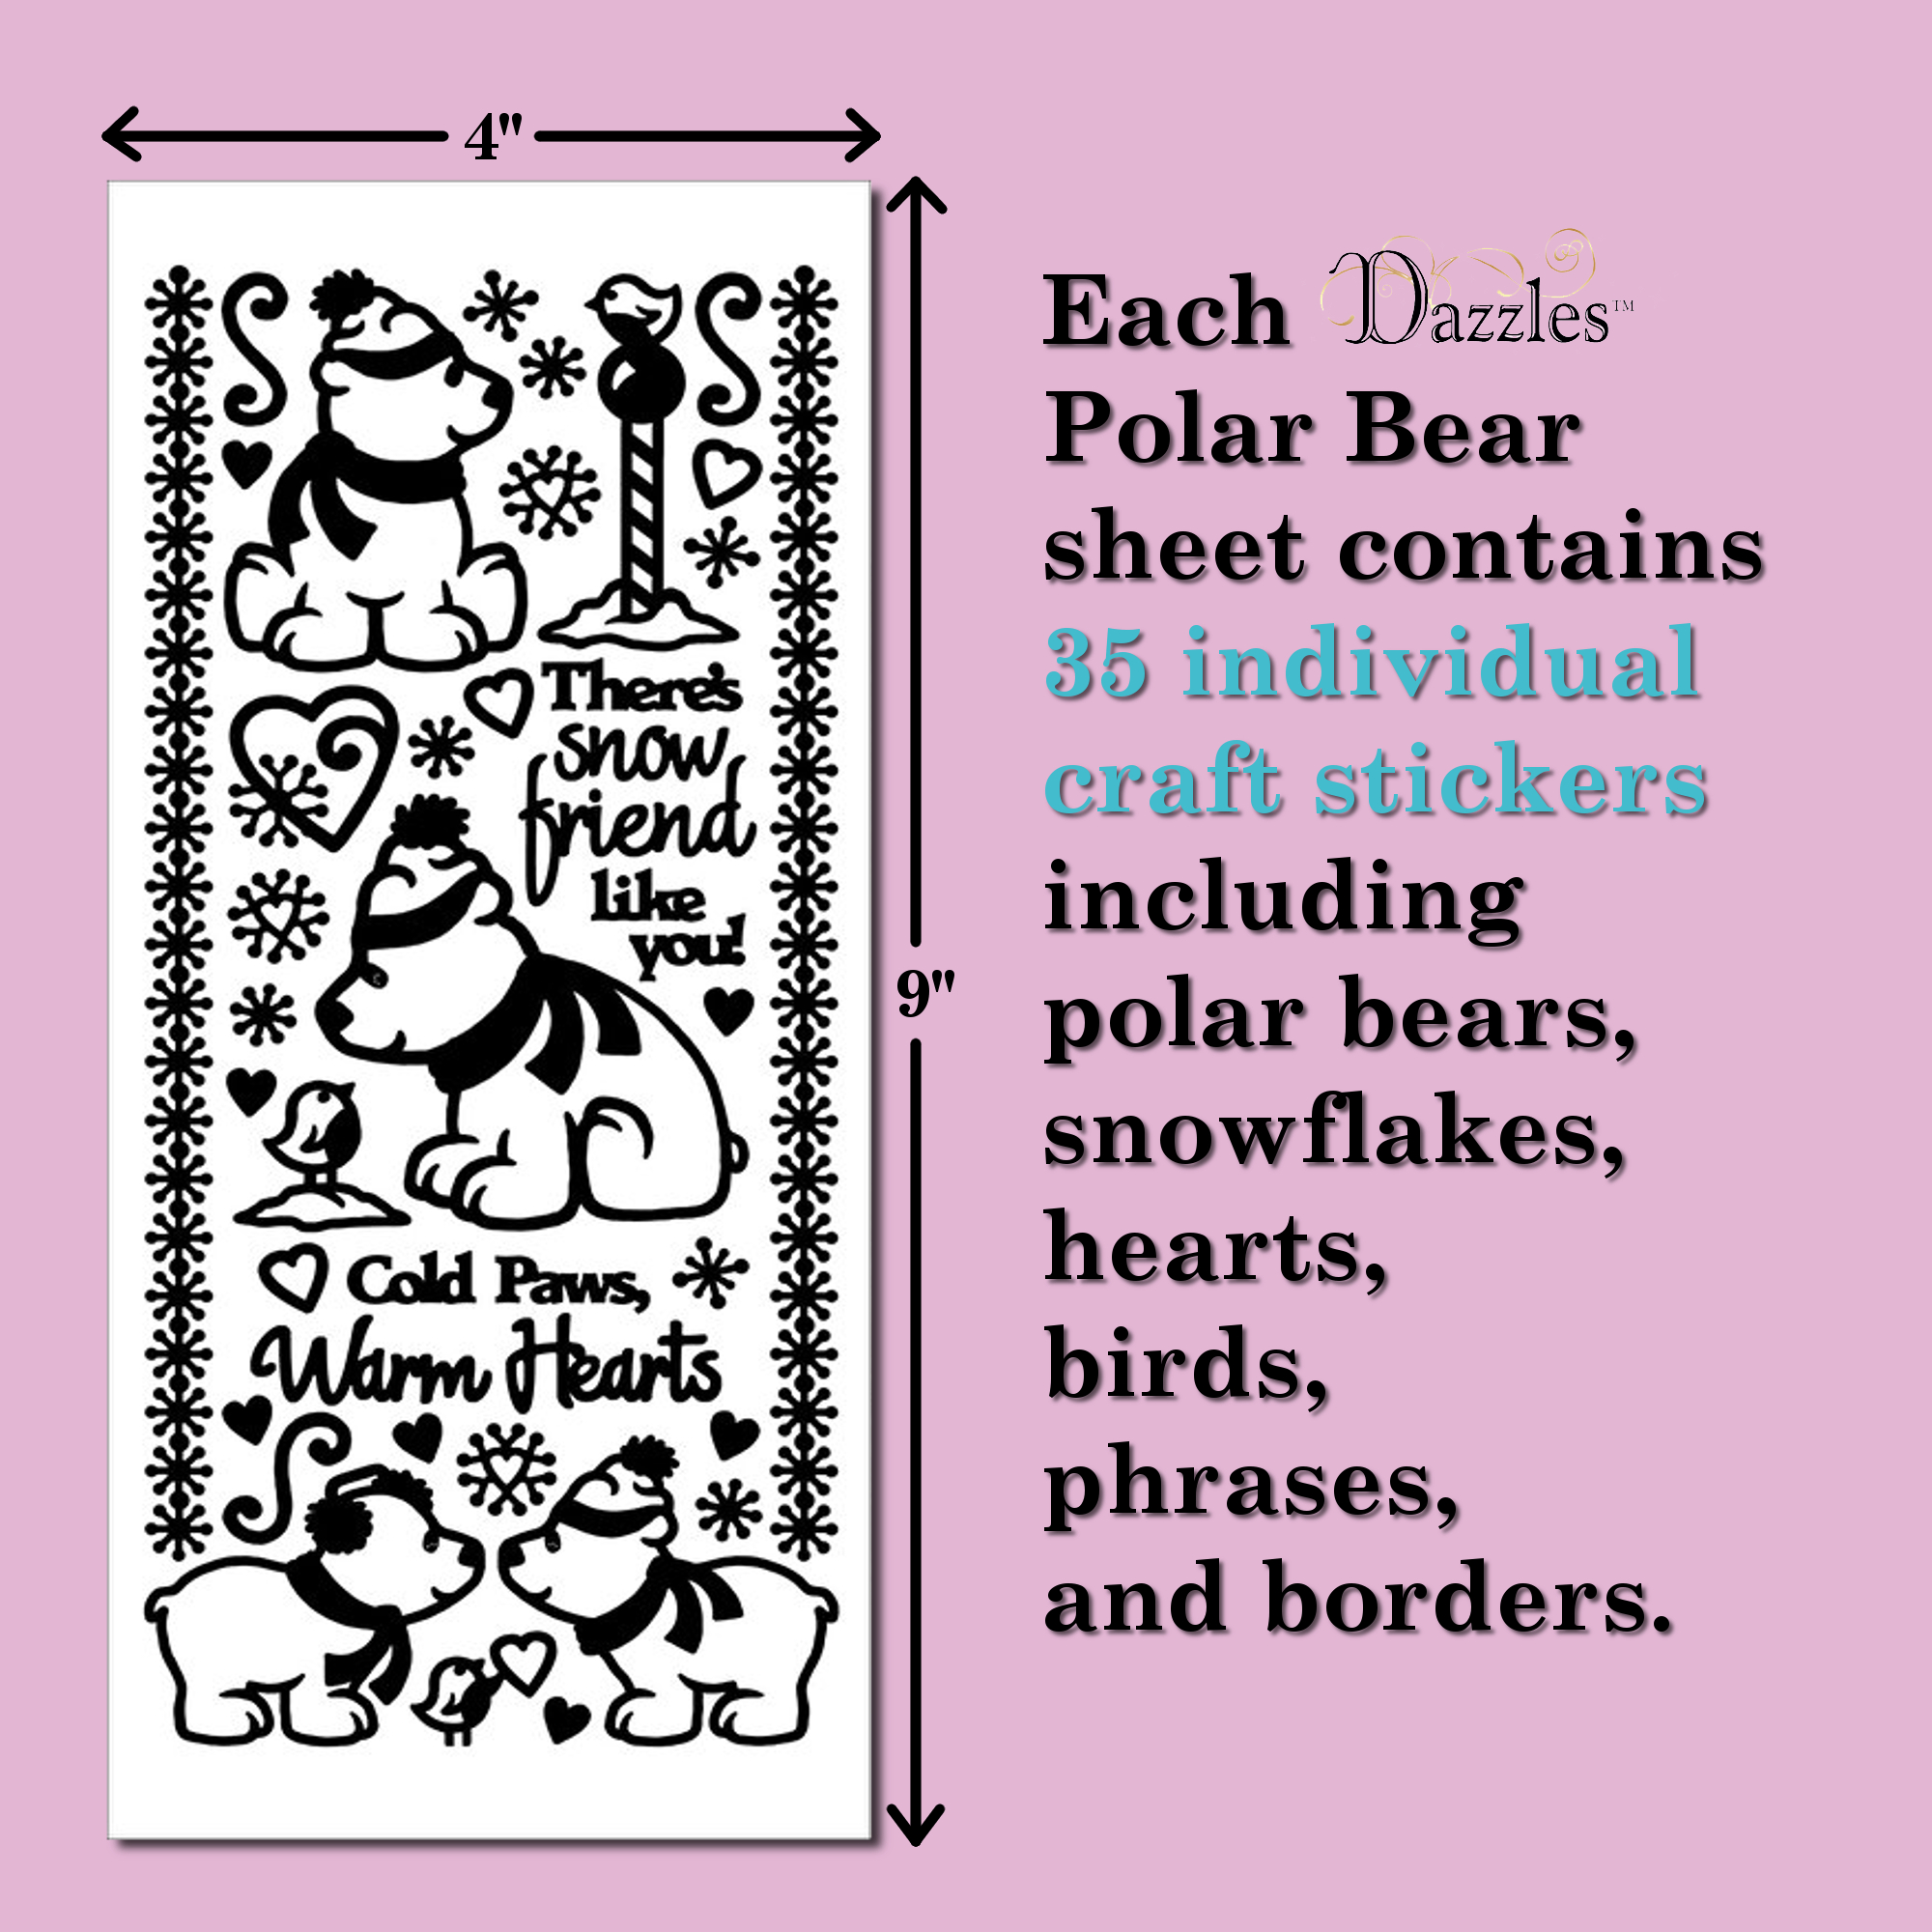 Uniporium Dazzles Stickers Collection | 300 Embossed Stickers of Polar Bears & Penguins in a Variety of Finishes & Colors for Scrapbooking, Card Making, Other Arts and Crafts Projects – 10 Sheets - image 4 of 6